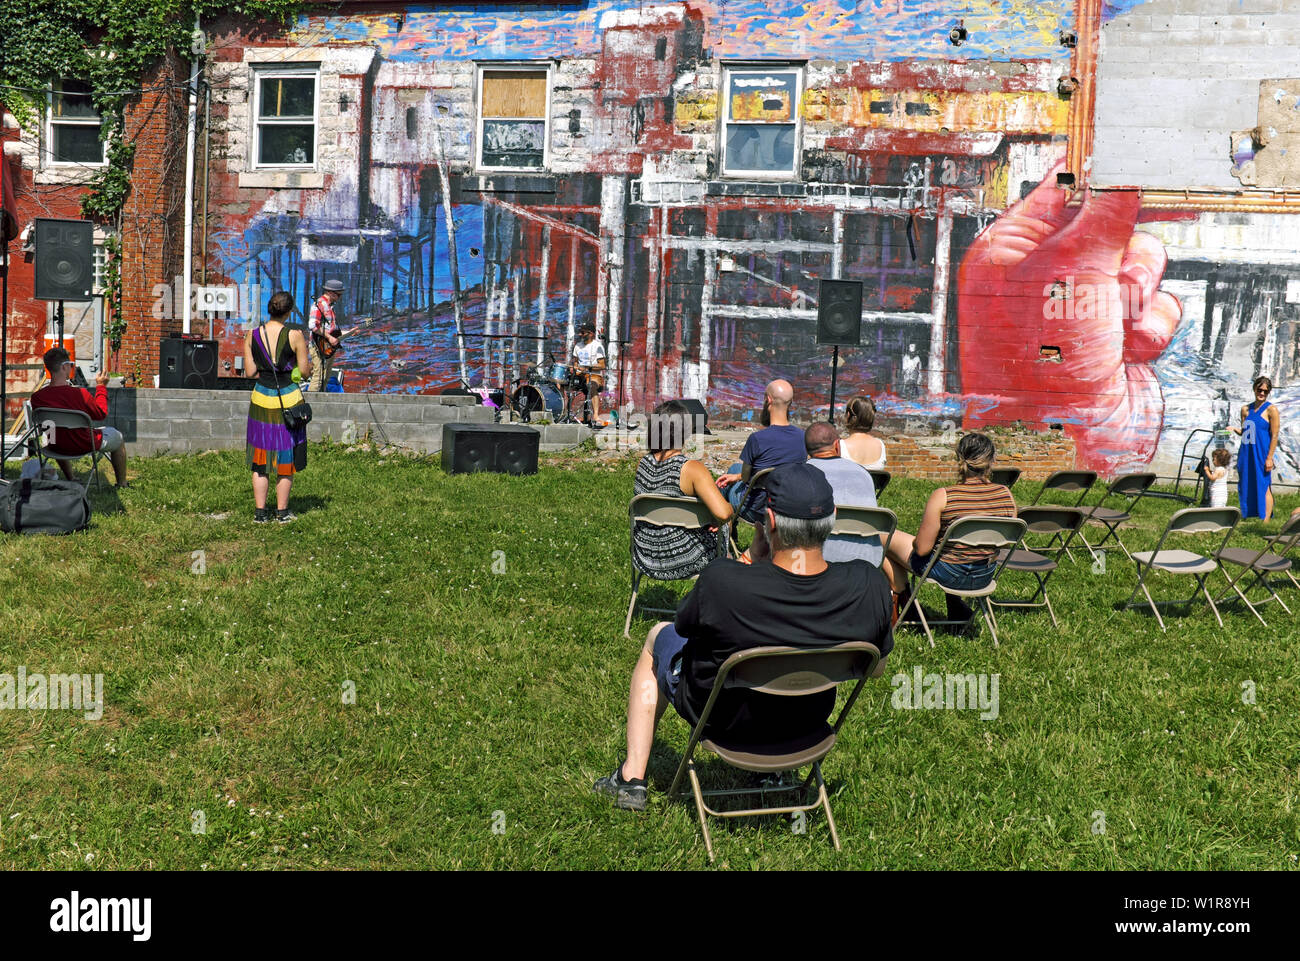 A musician plays outdoors during the summer in the Waterloo Arts District neighborhood in Cleveland, Ohio, USA. Stock Photo